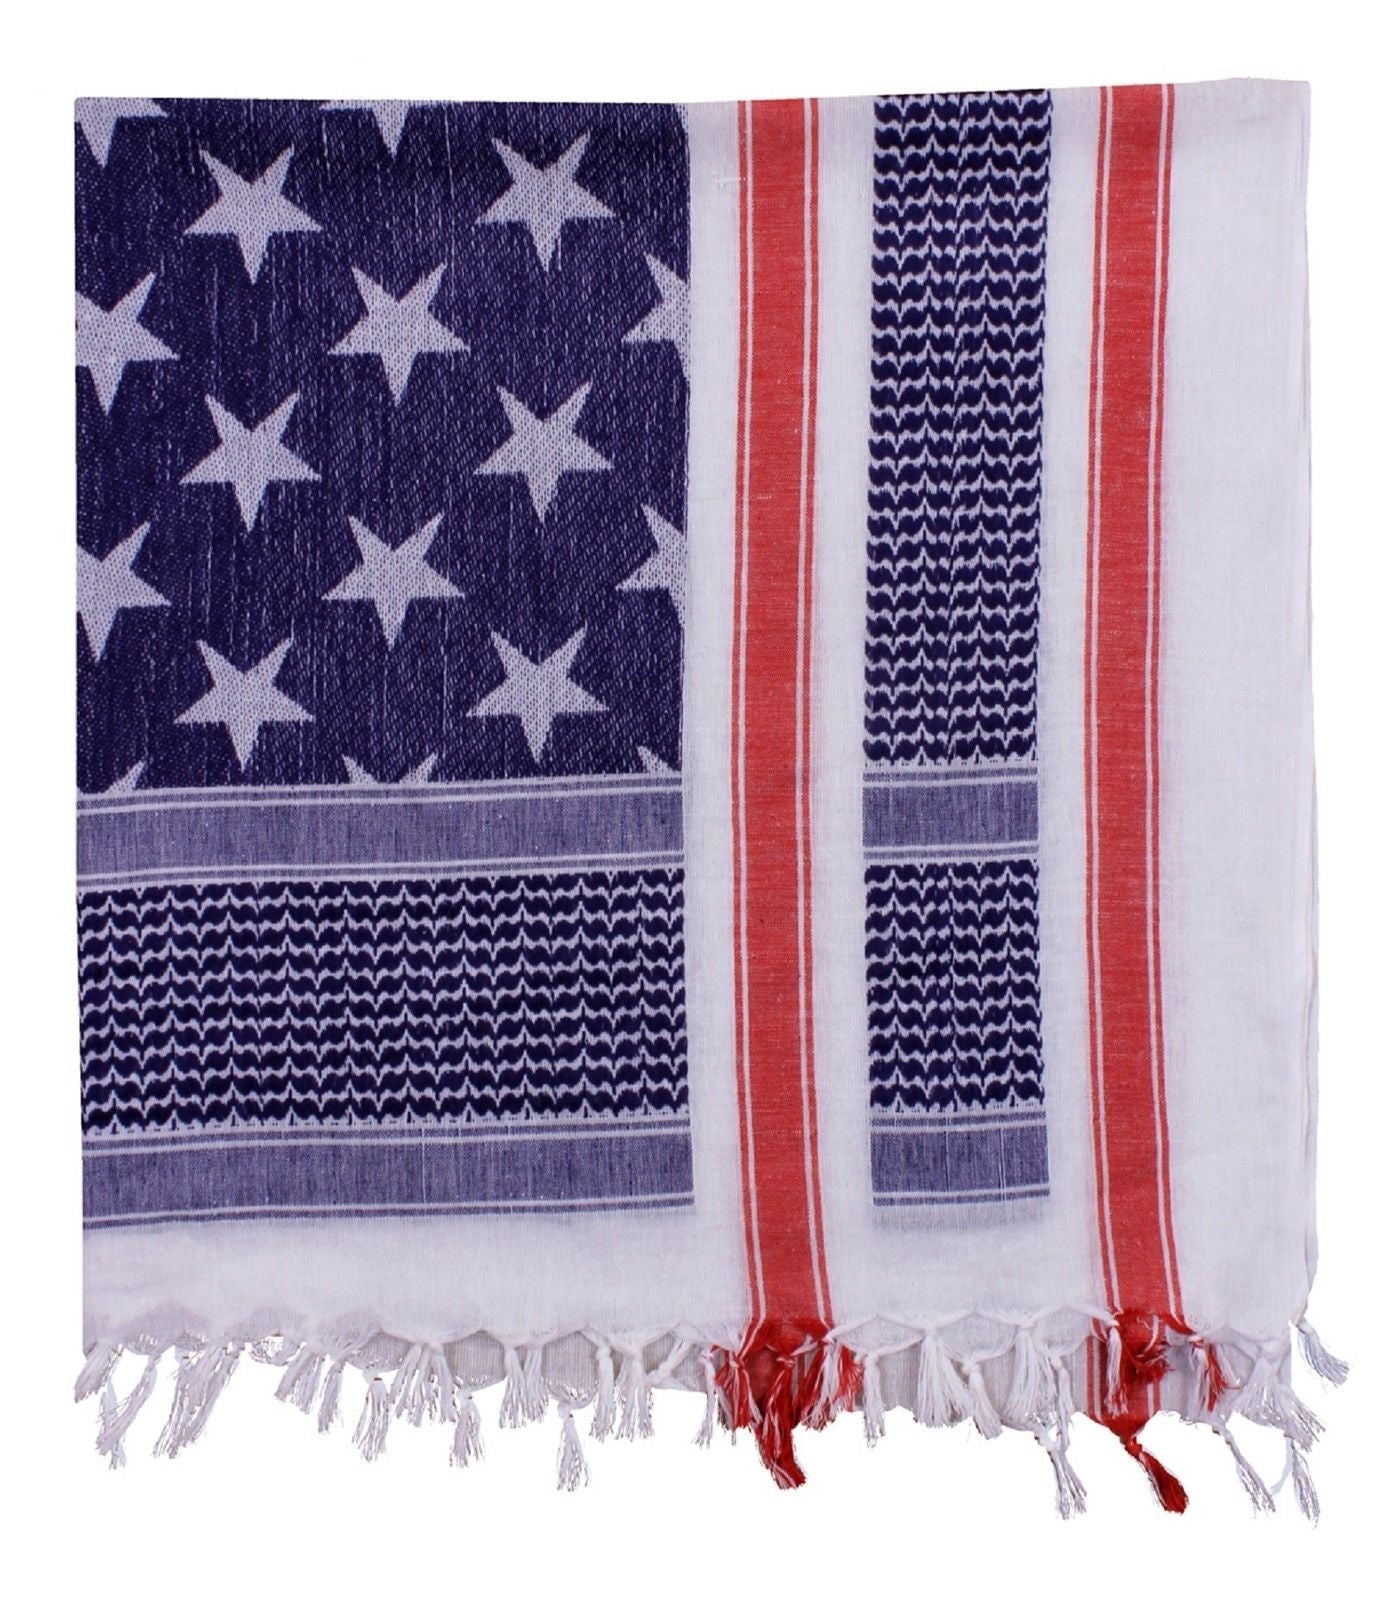 USA American Flag Tactical Shemagh Desert Scarf Rothco Cotton Keffiyeh Scarves